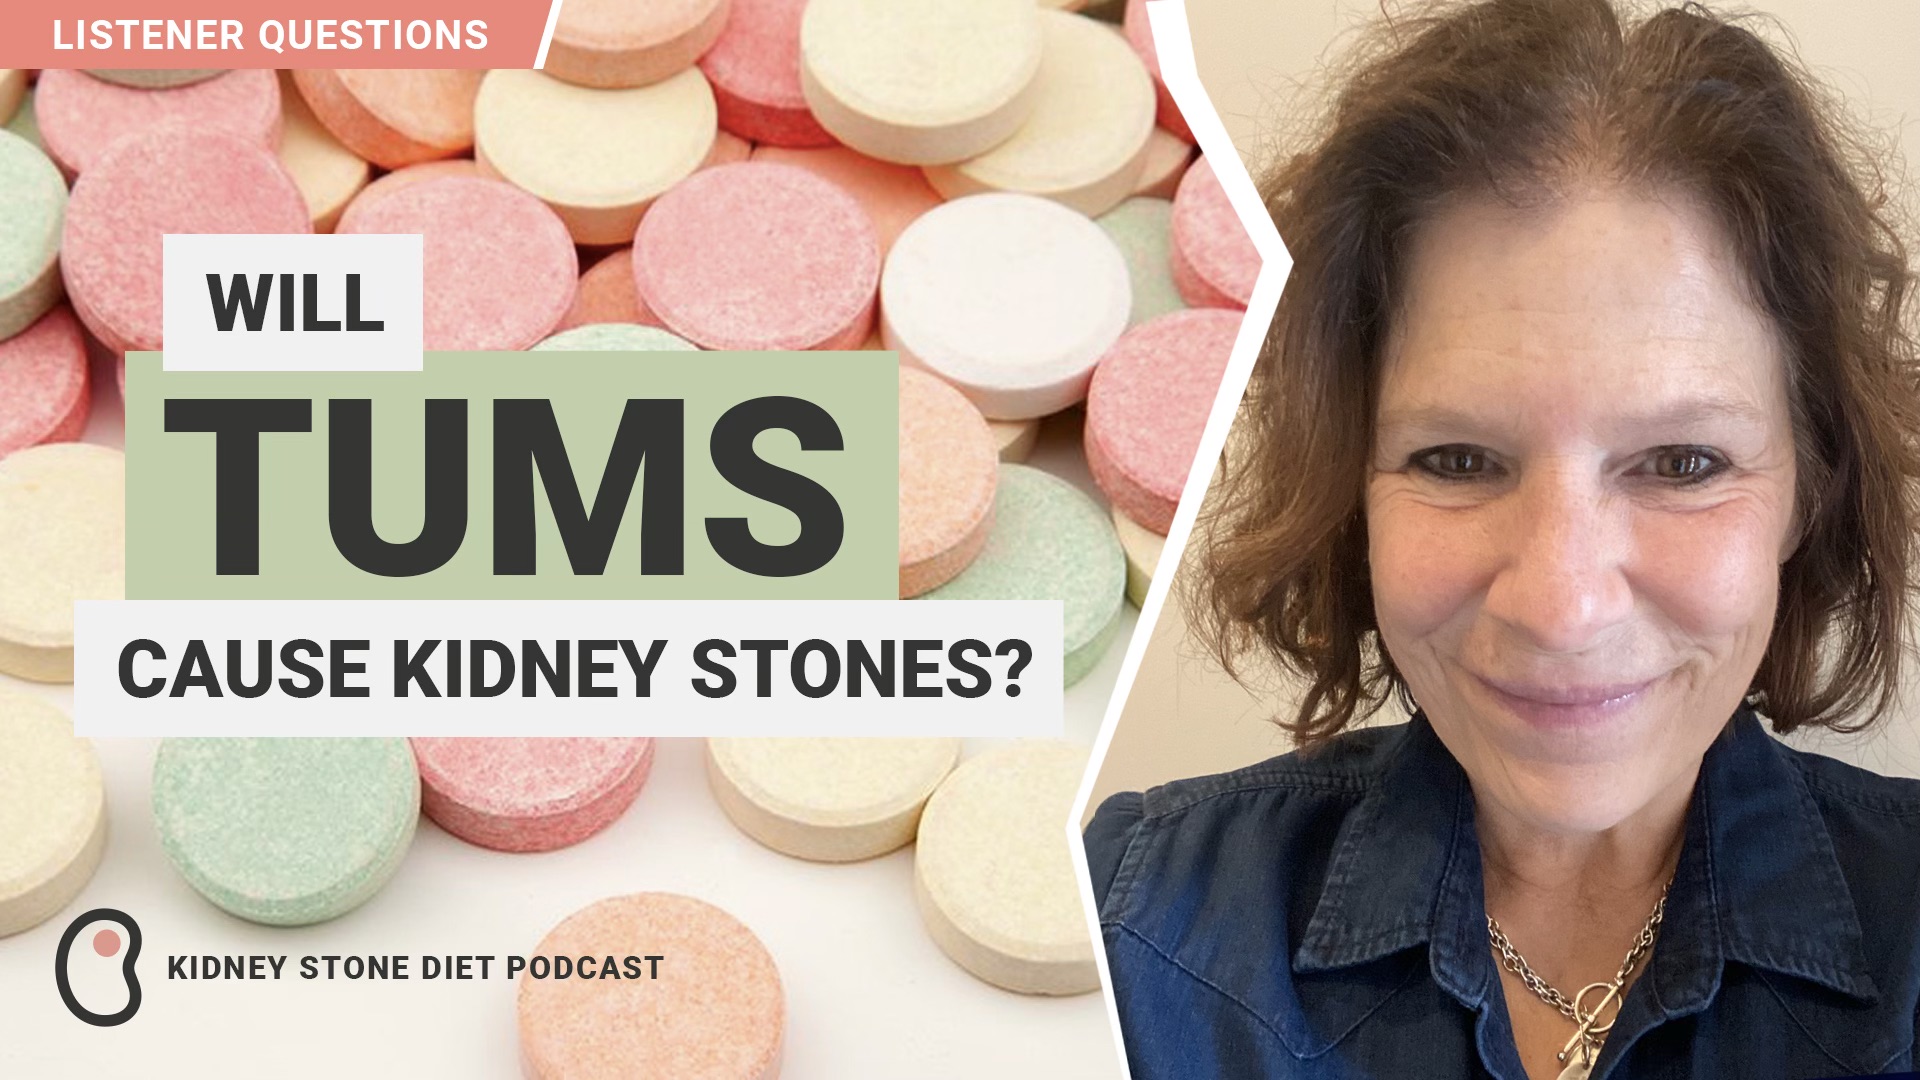 Will TUMS cause kidney stones?